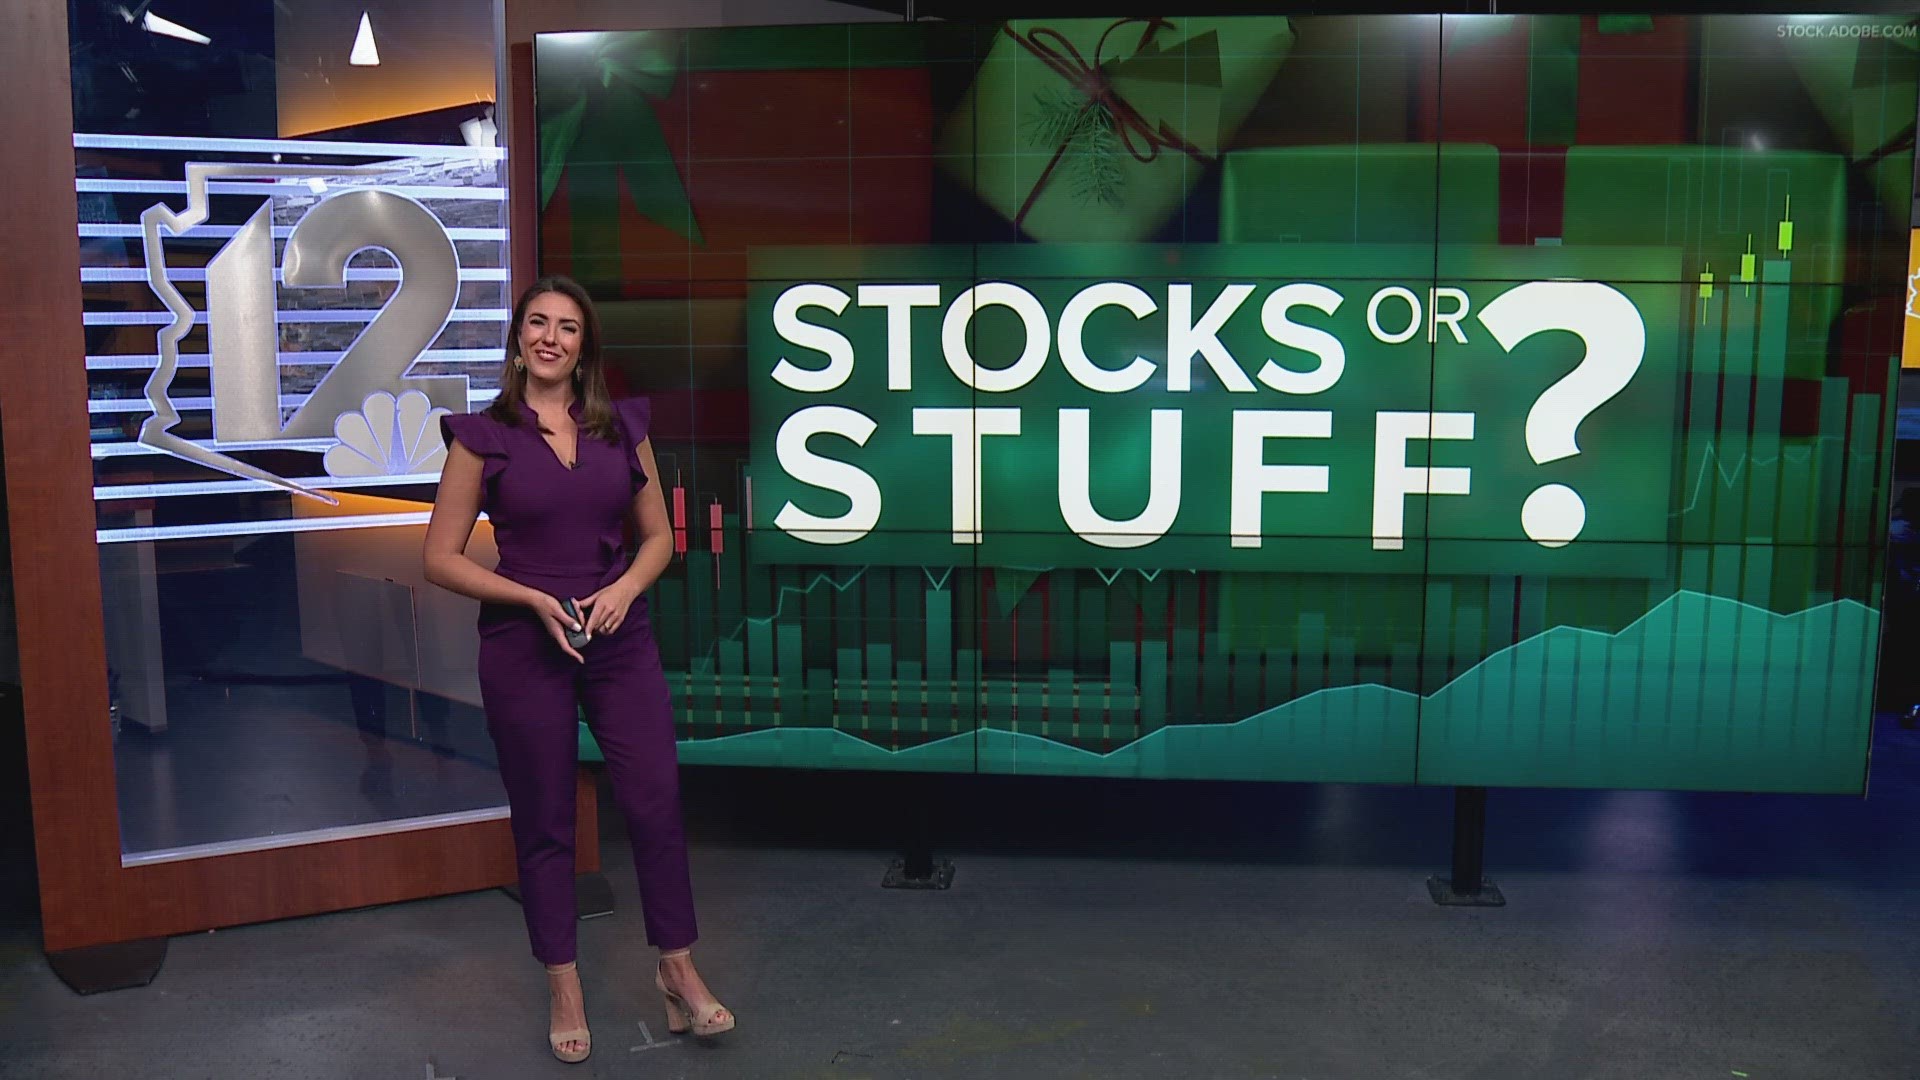 Phoenix-based financial planner with Edward Jones Angelica Prescod has a suggestion for your holiday shopping list: give stocks not stuff!